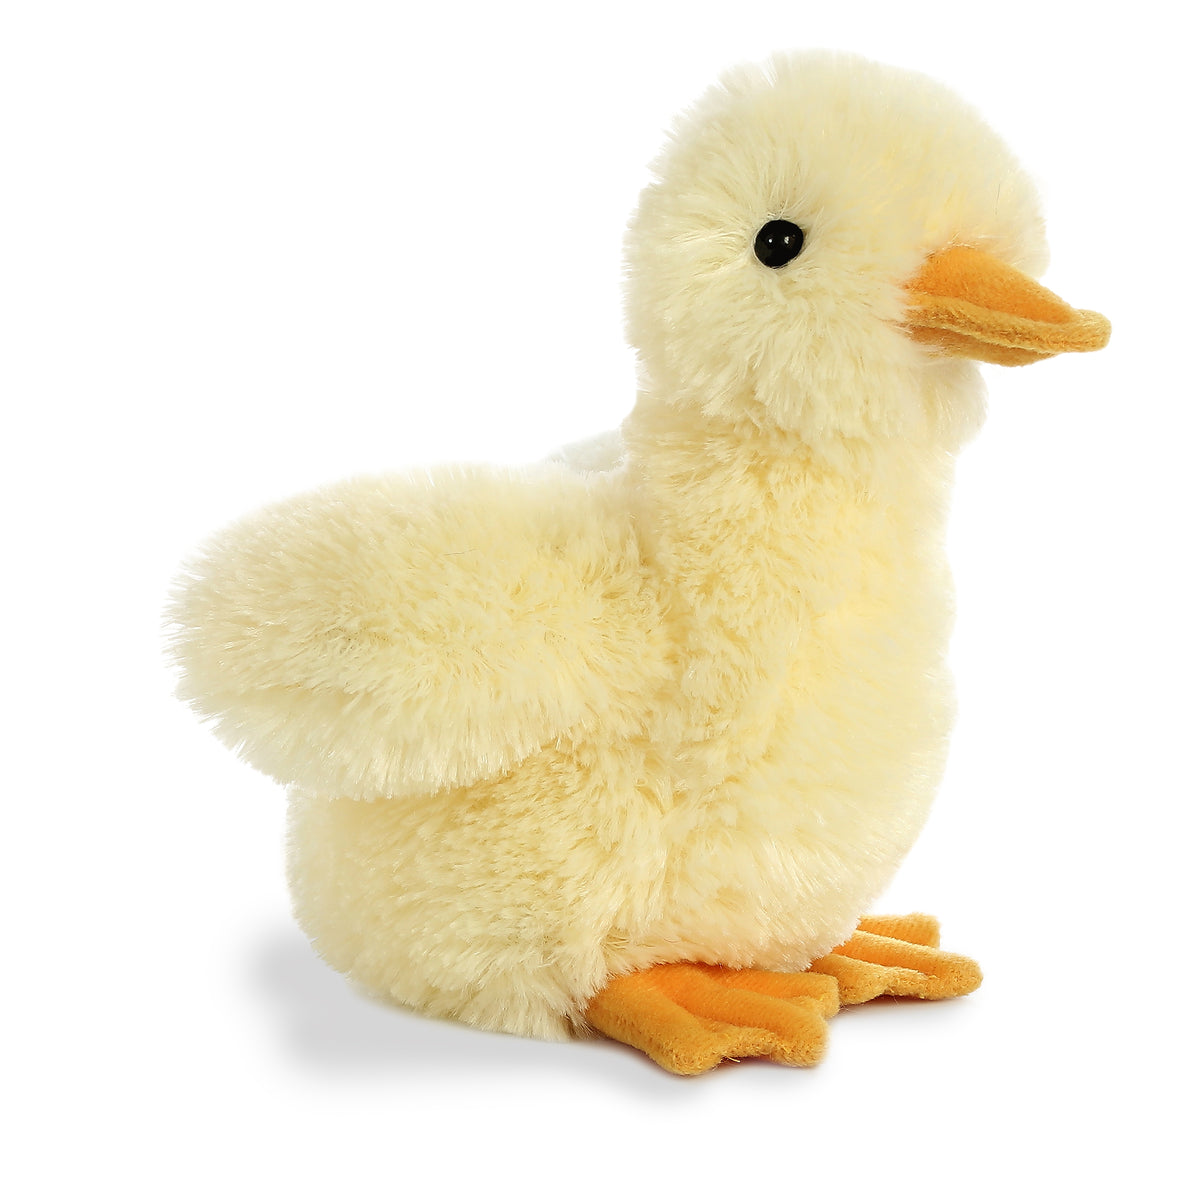 Fluffy Duckling Plush from Aurora's Mini Flopsie collection, soft yellow fur with an adorable duckling expression